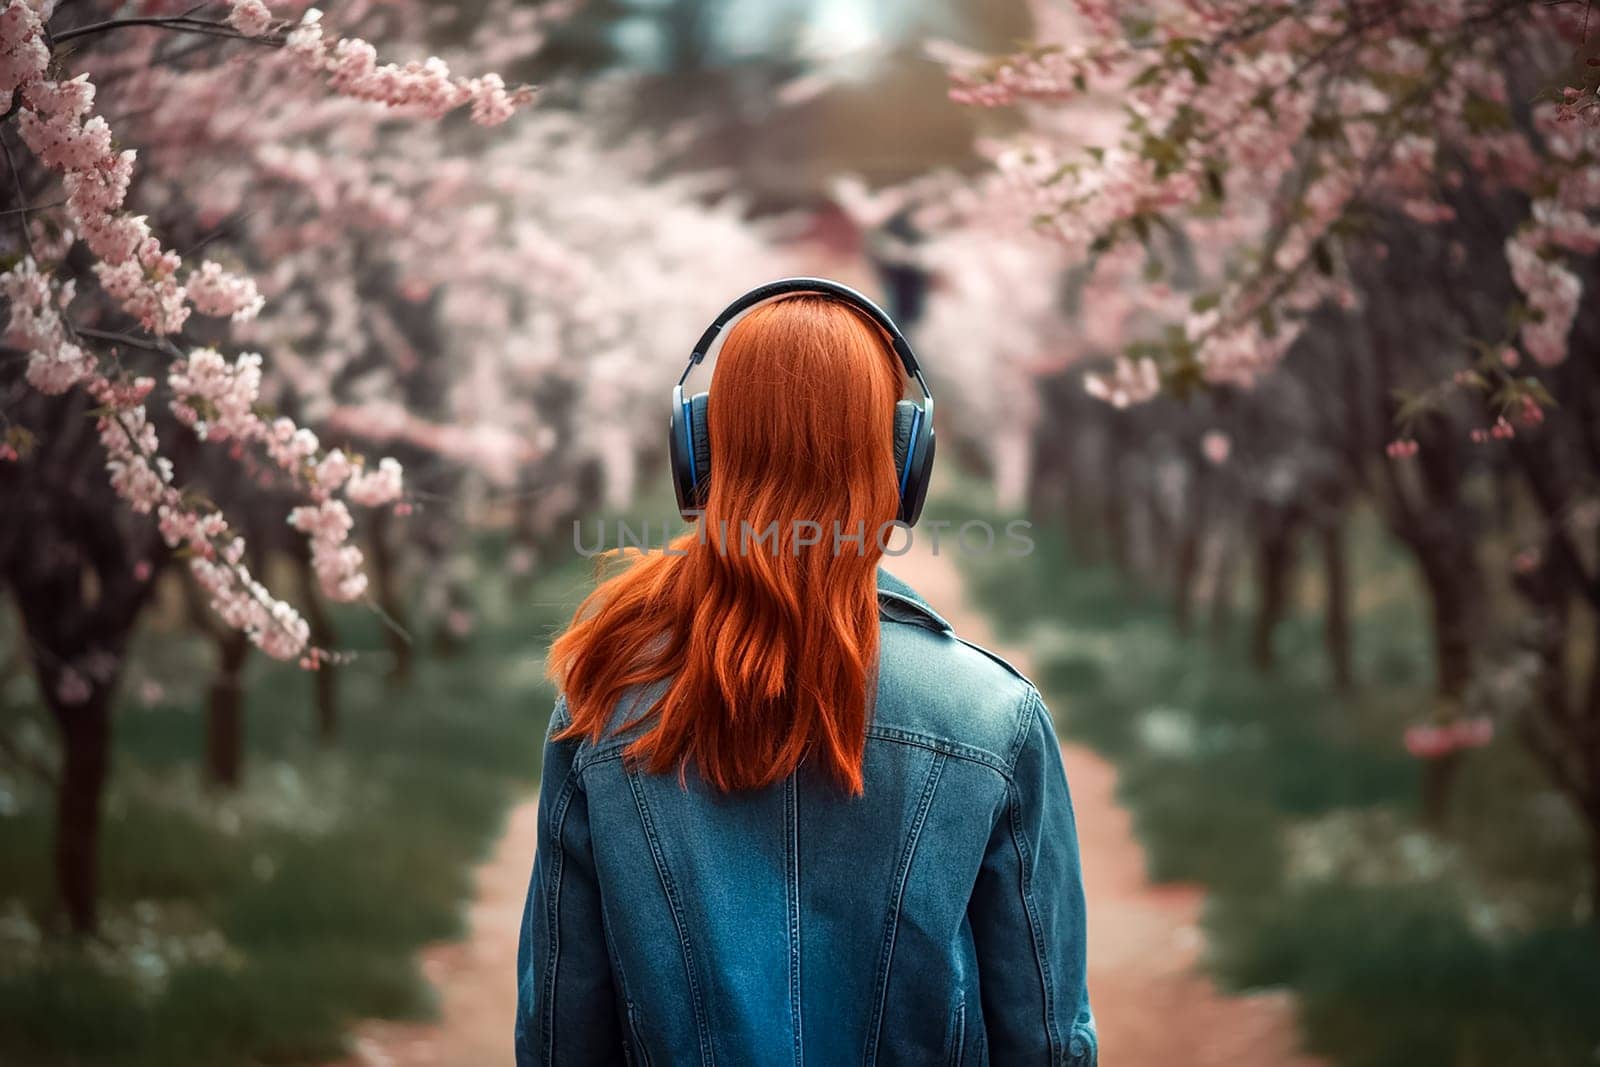 Red Hear Girl in a busy spring town or city street listens to music in wireless headphones. Girl no face visible on the background of spring flowering park.